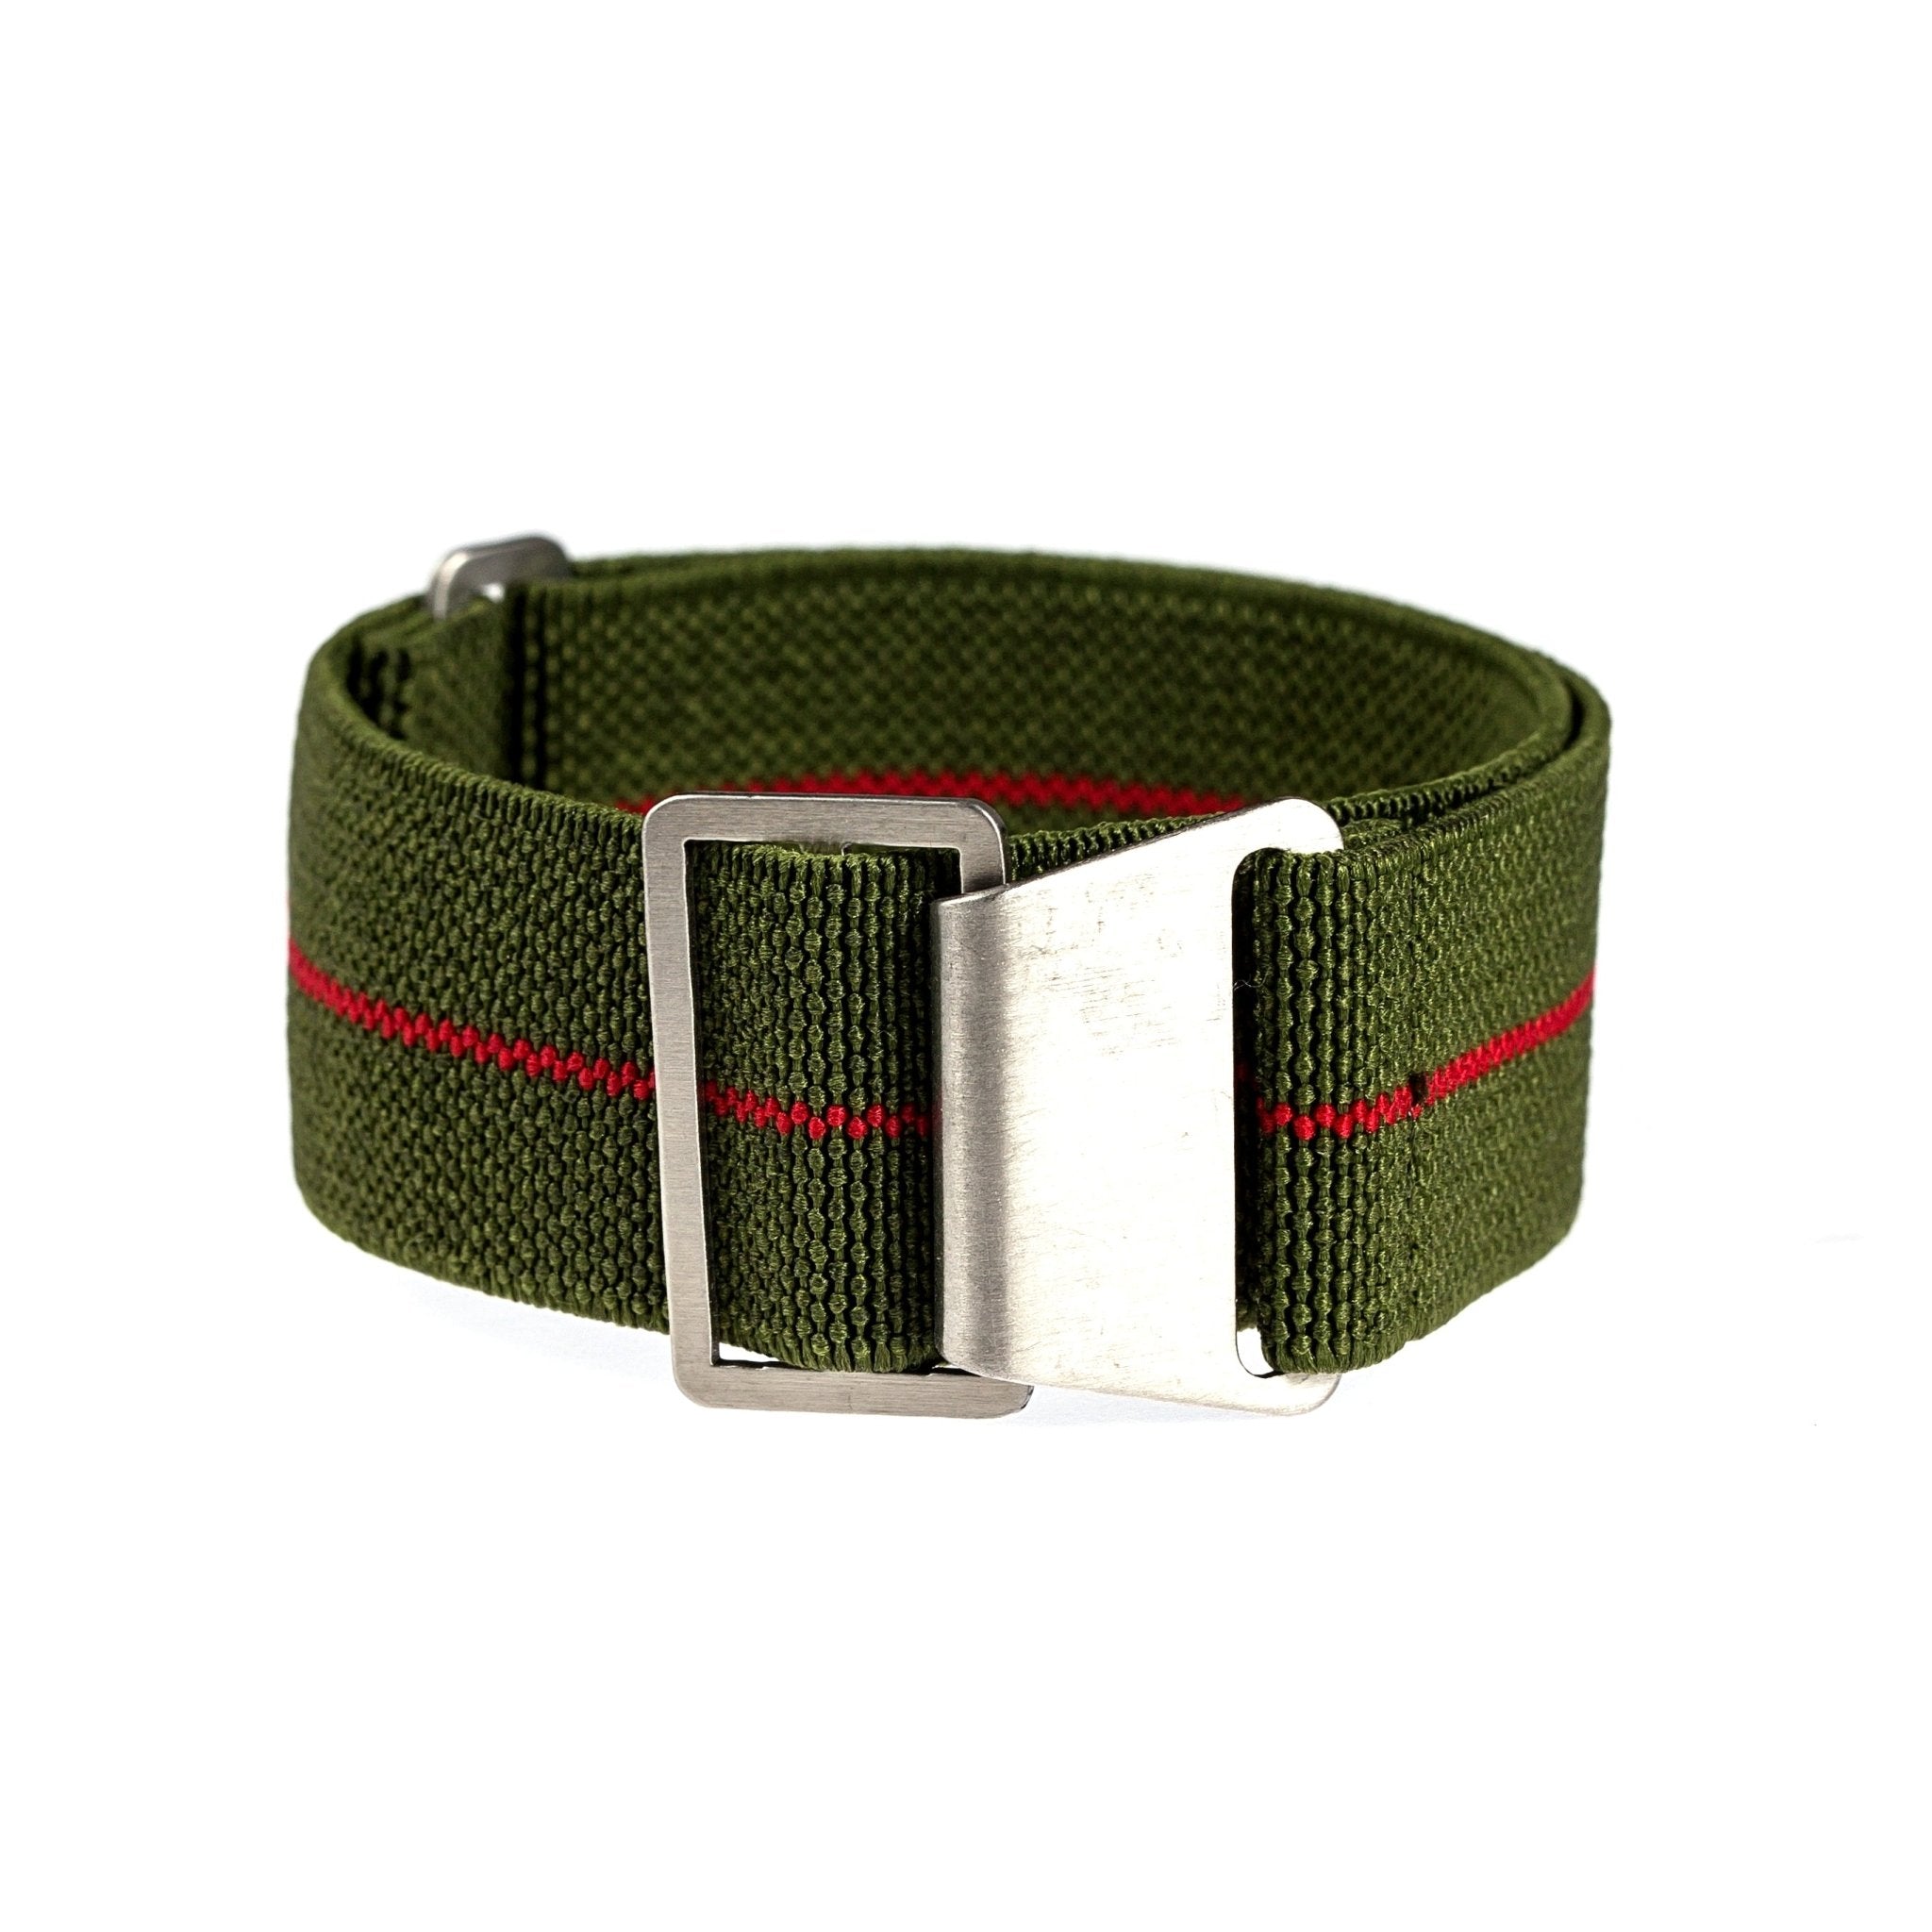 Marine Nationale Parachute Elastic Loop Strap Army Green with Red Line (2417) -StrapSeeker